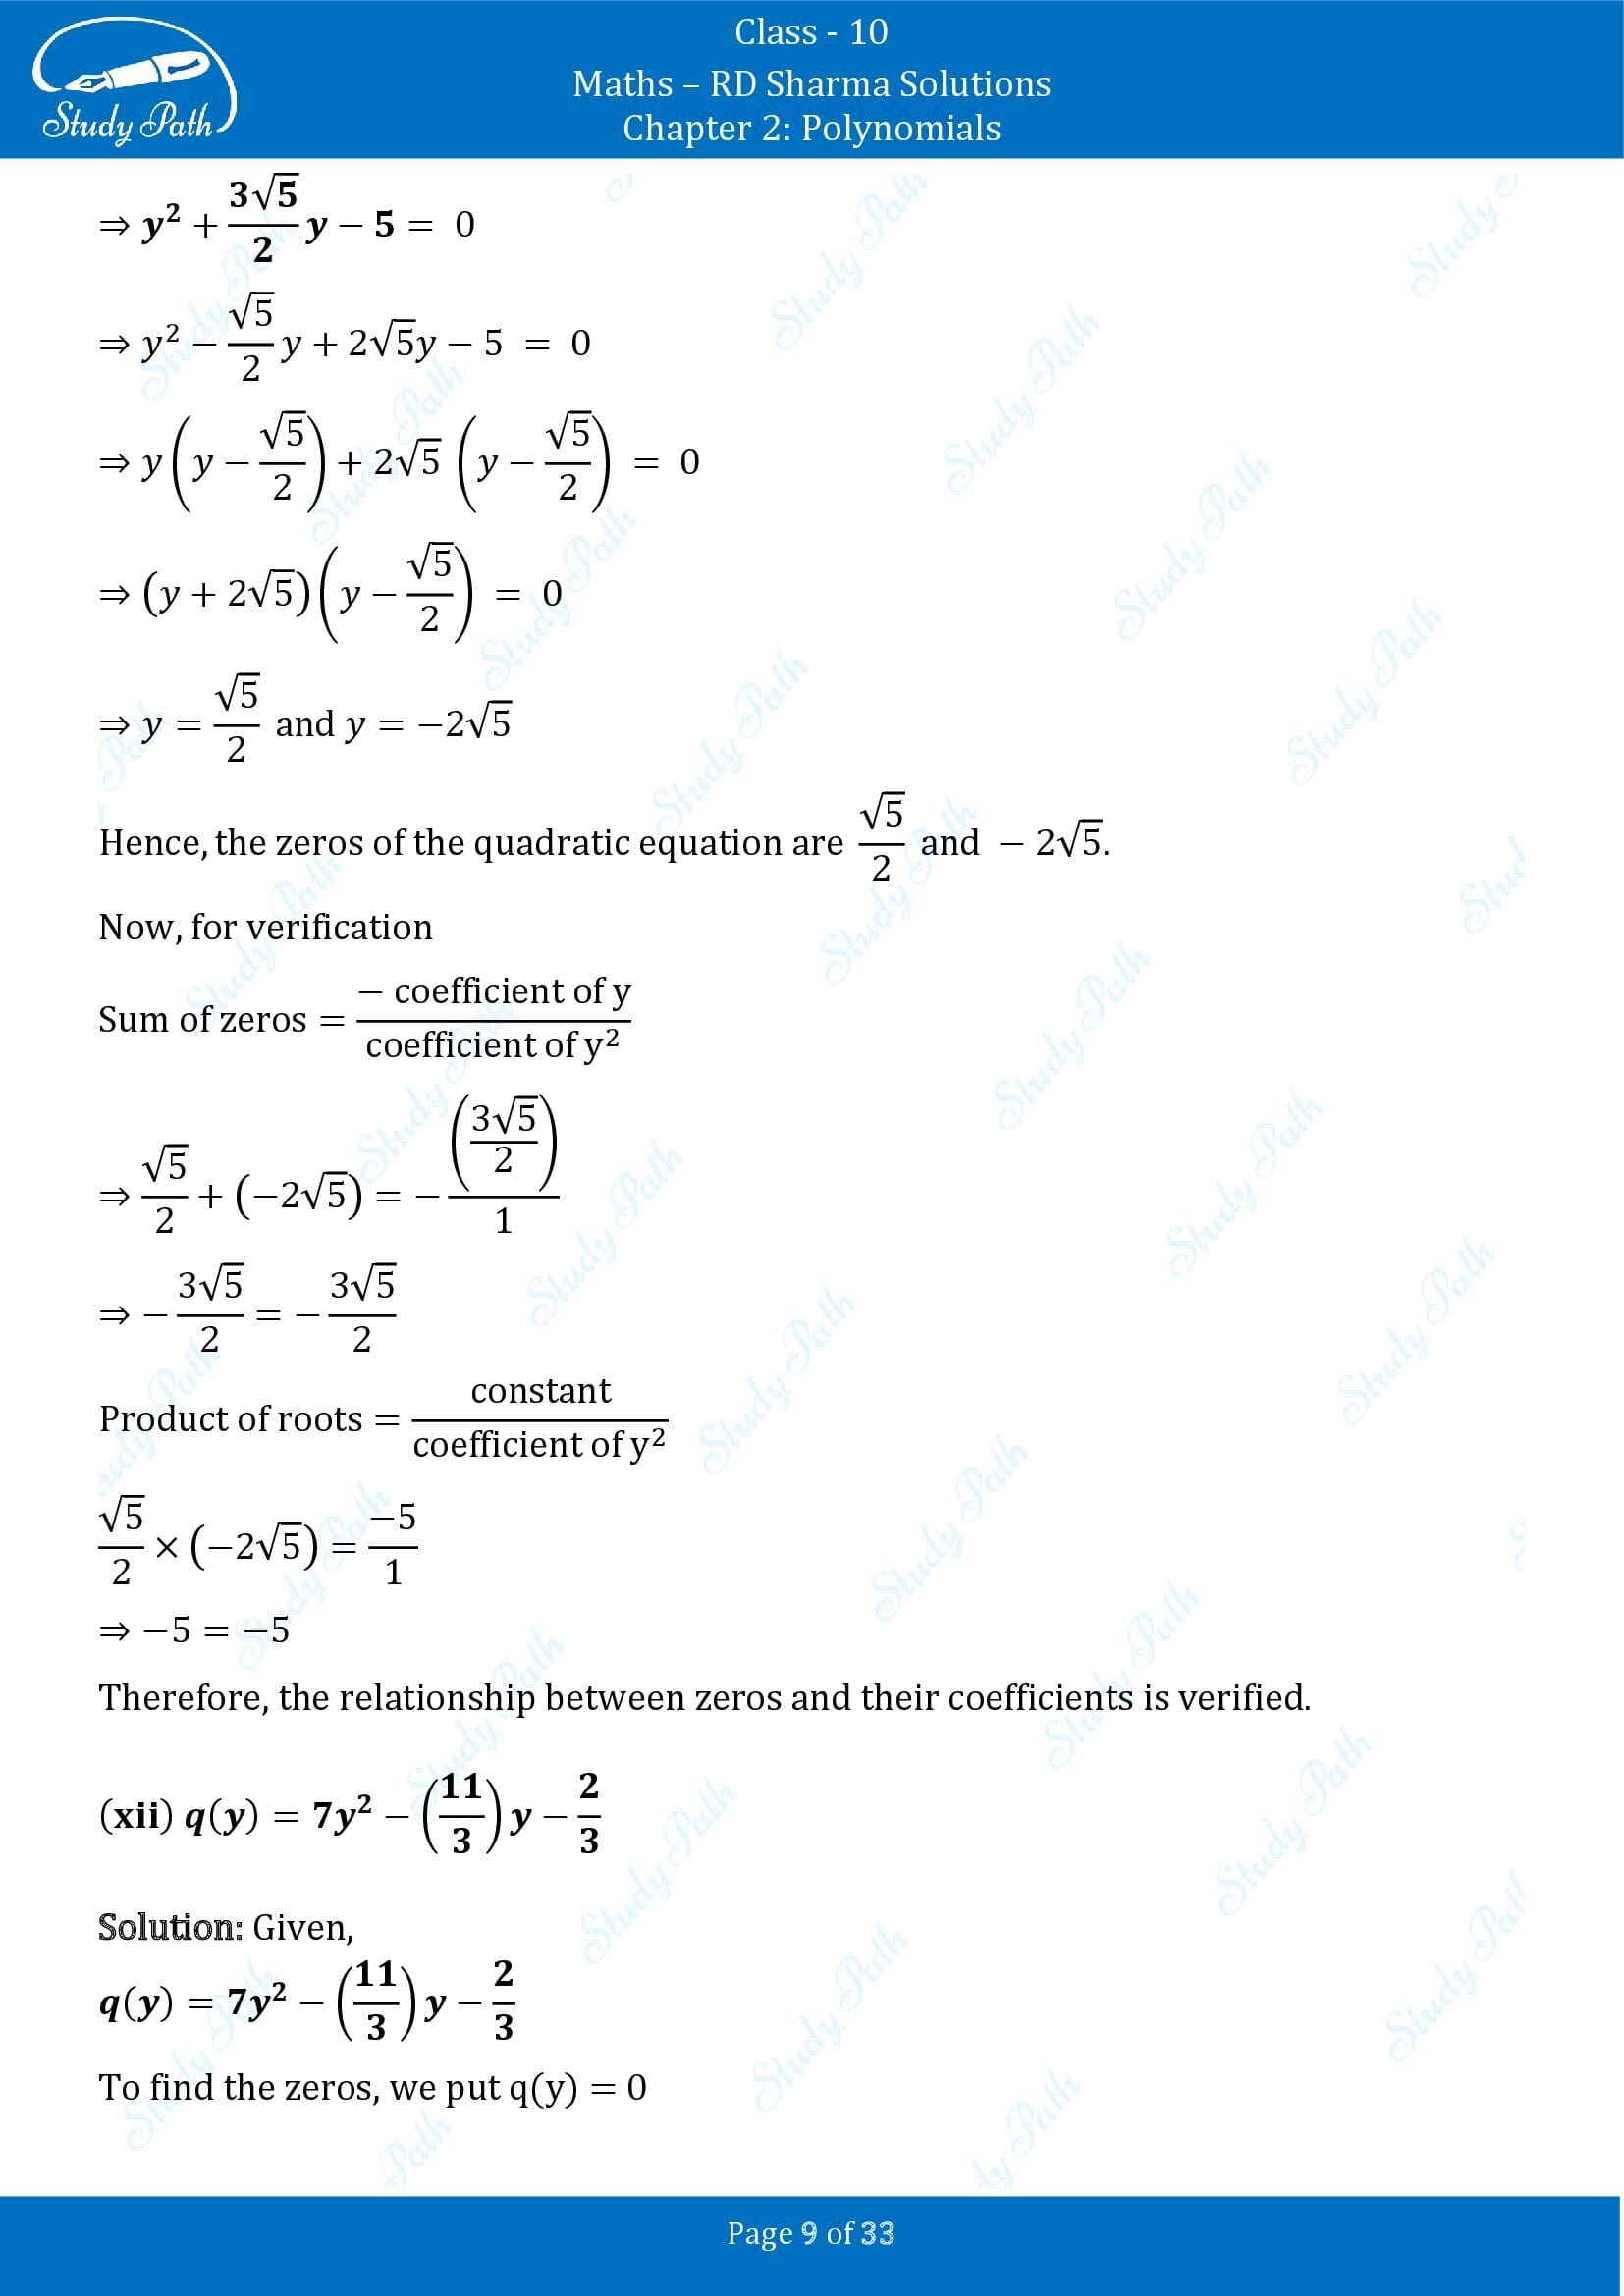 RD Sharma Solutions Class 10 Chapter 2 Polynomials Exercise 2.1 00009